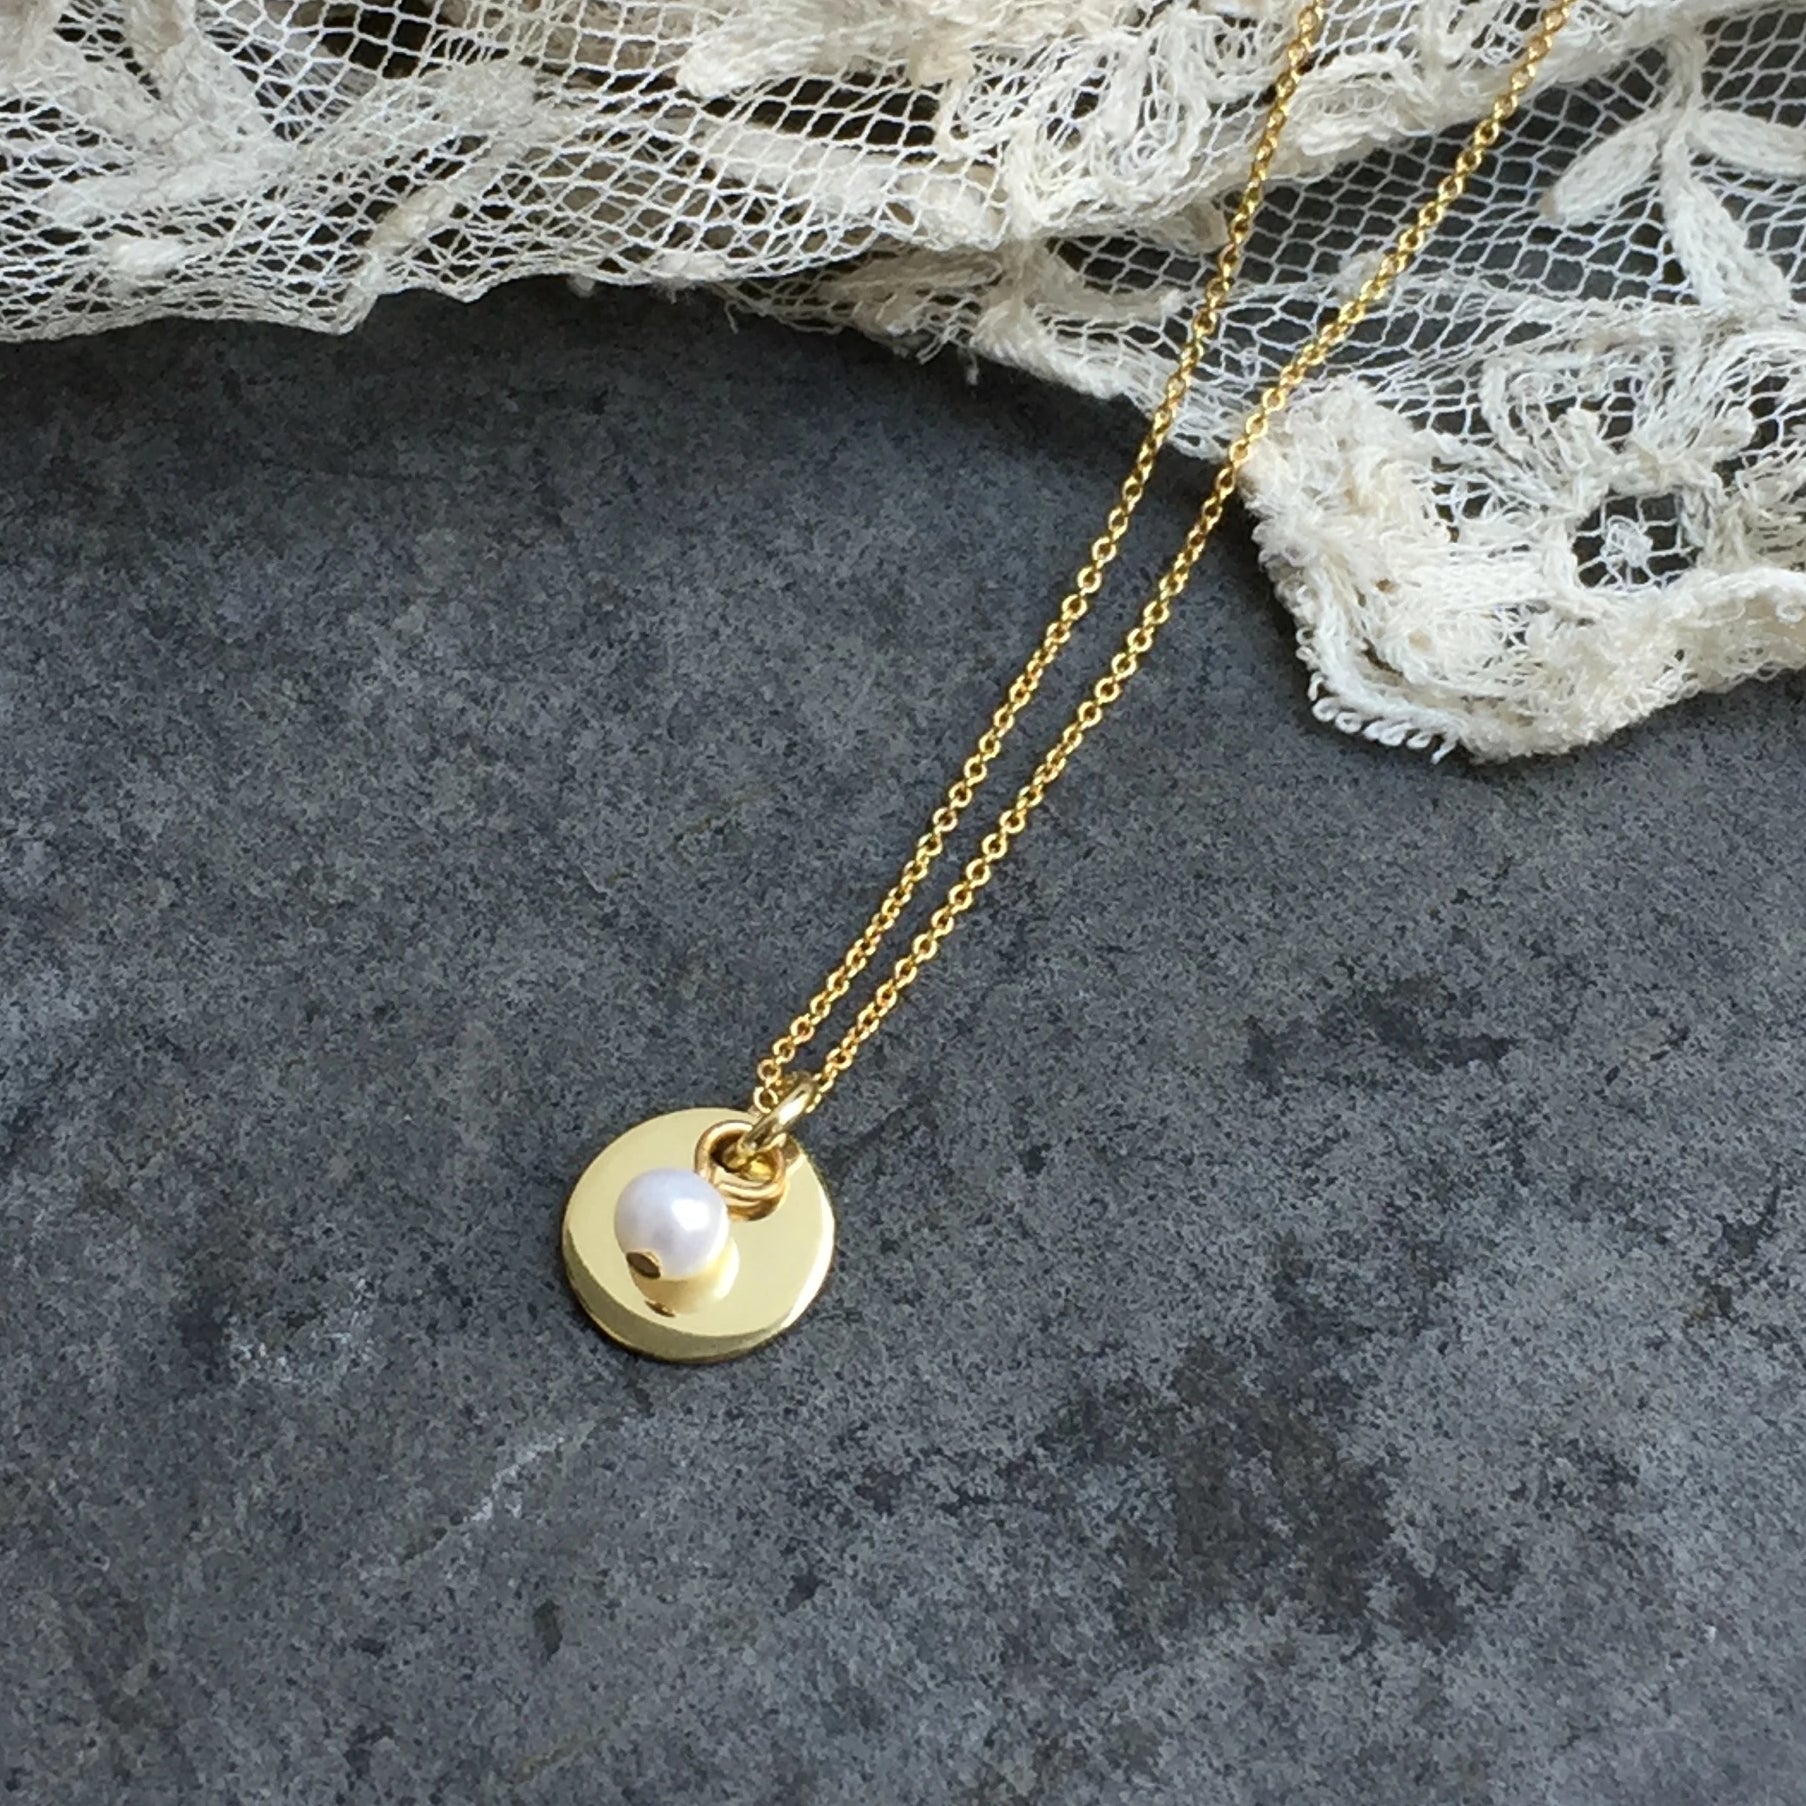 'Coin & pearl' necklace | 24k gold-plated